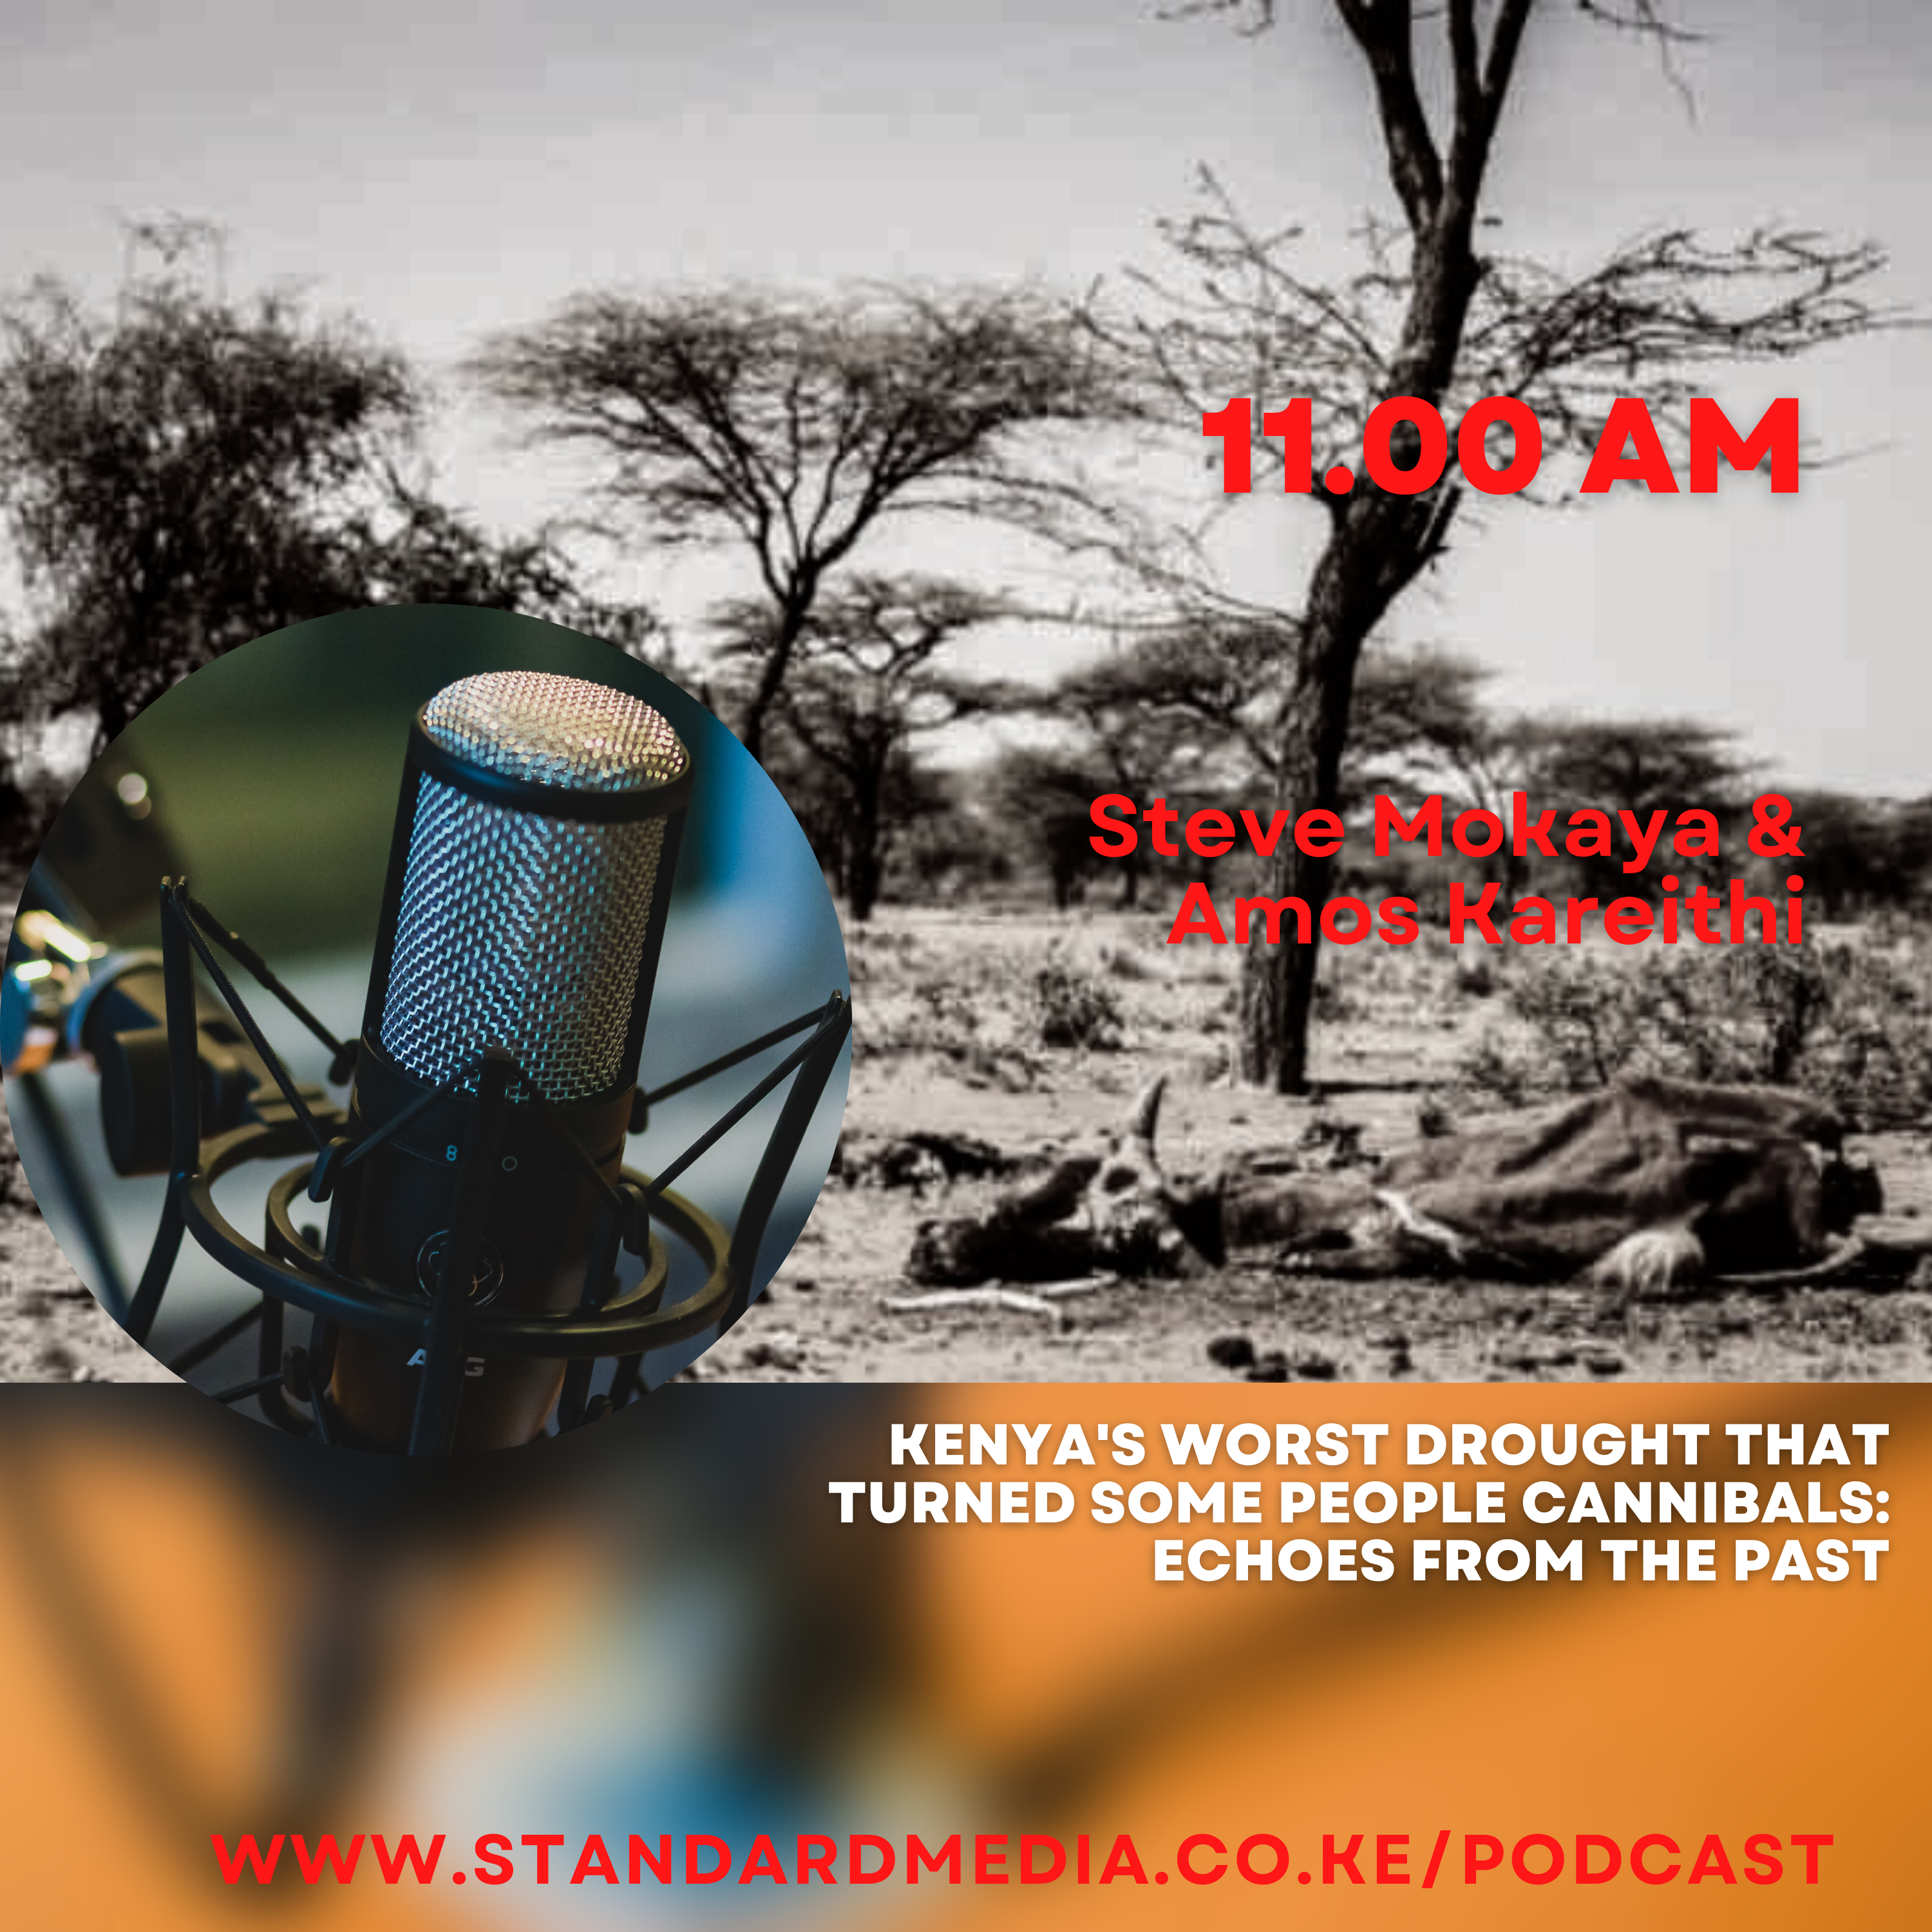 Kenya's worst drought that turned people cannibals: Echoes from the past